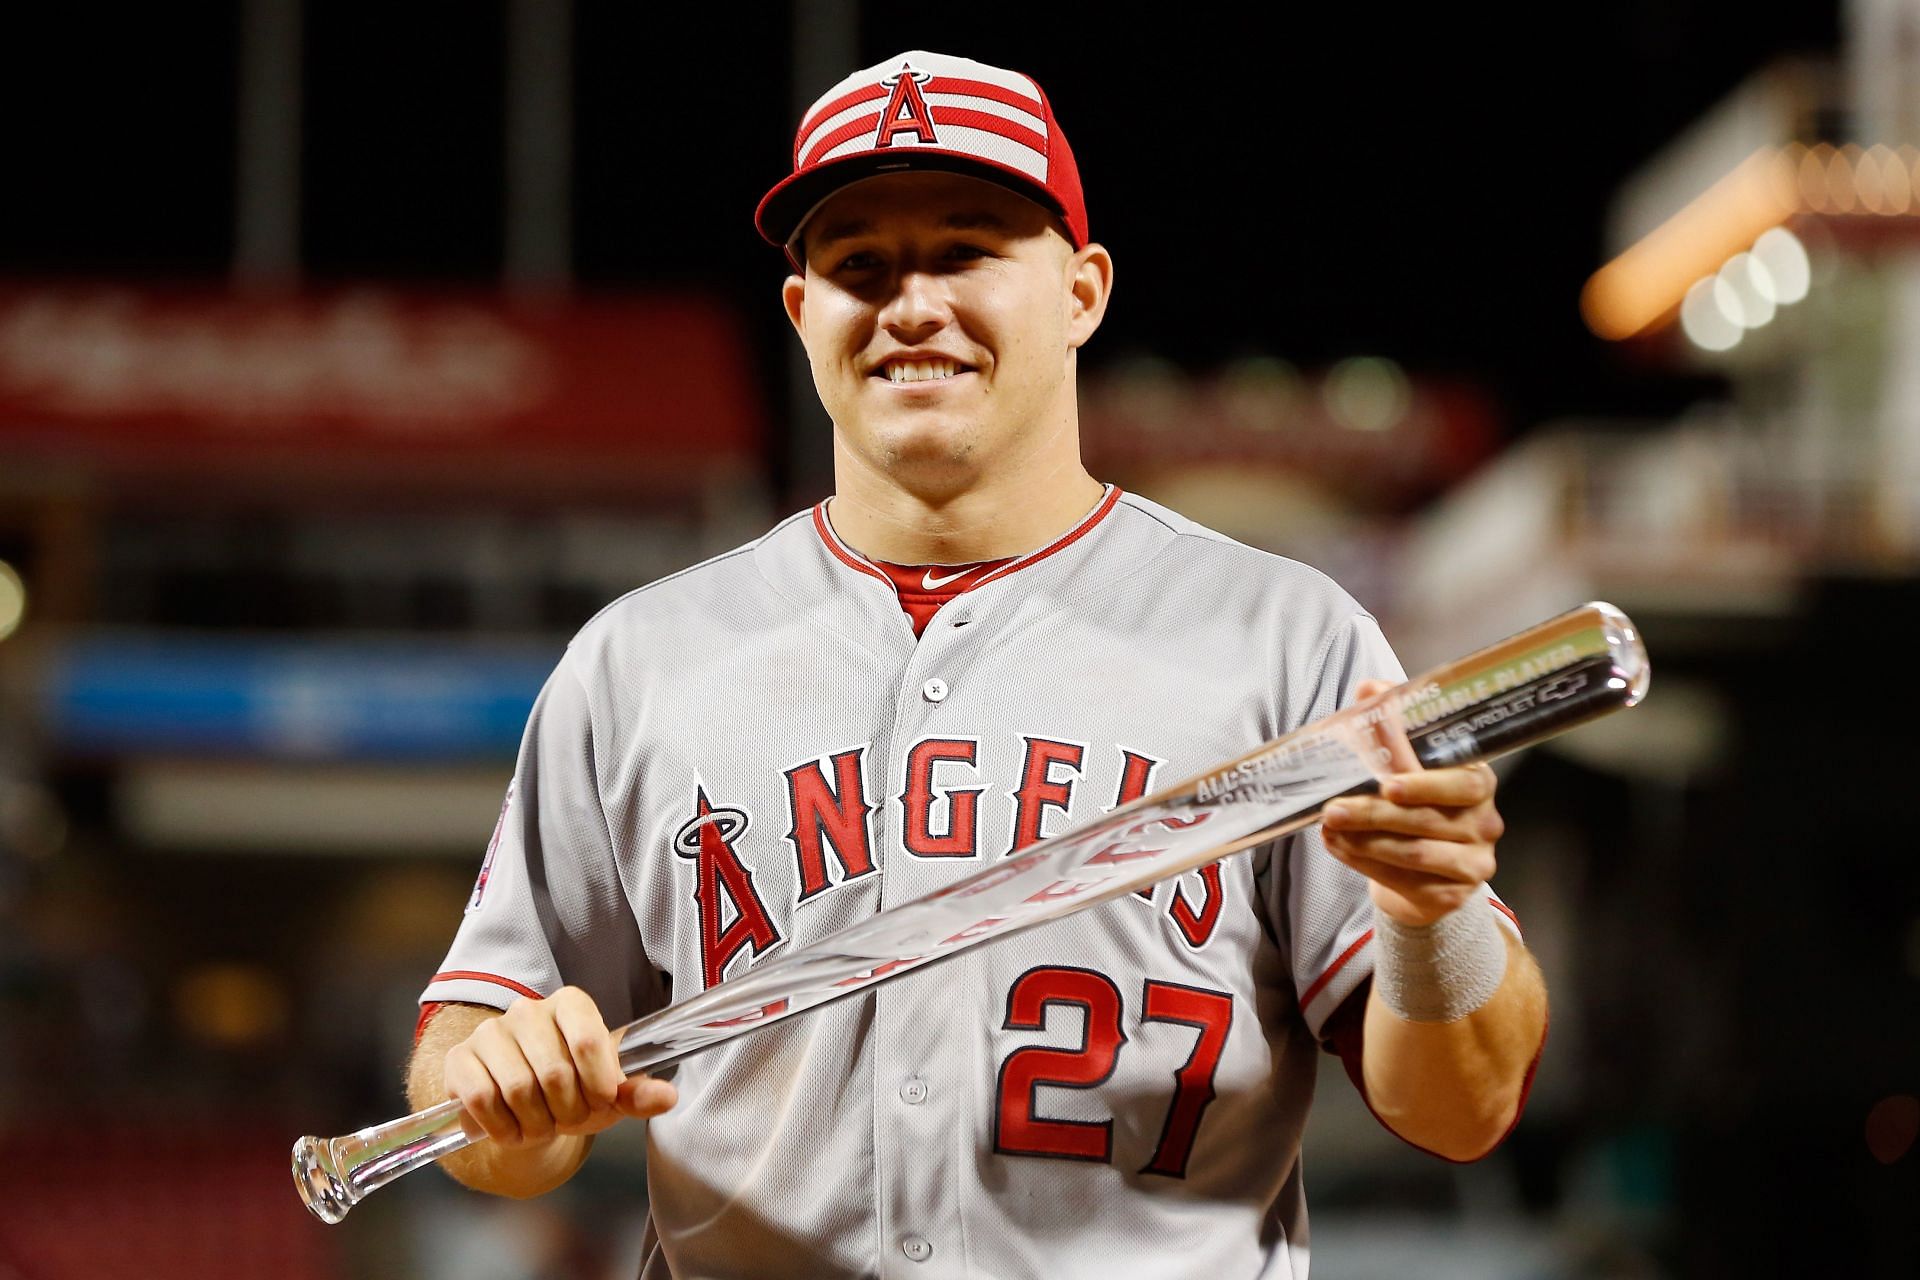 86th MLB All-Star Game featuring Mike Trout